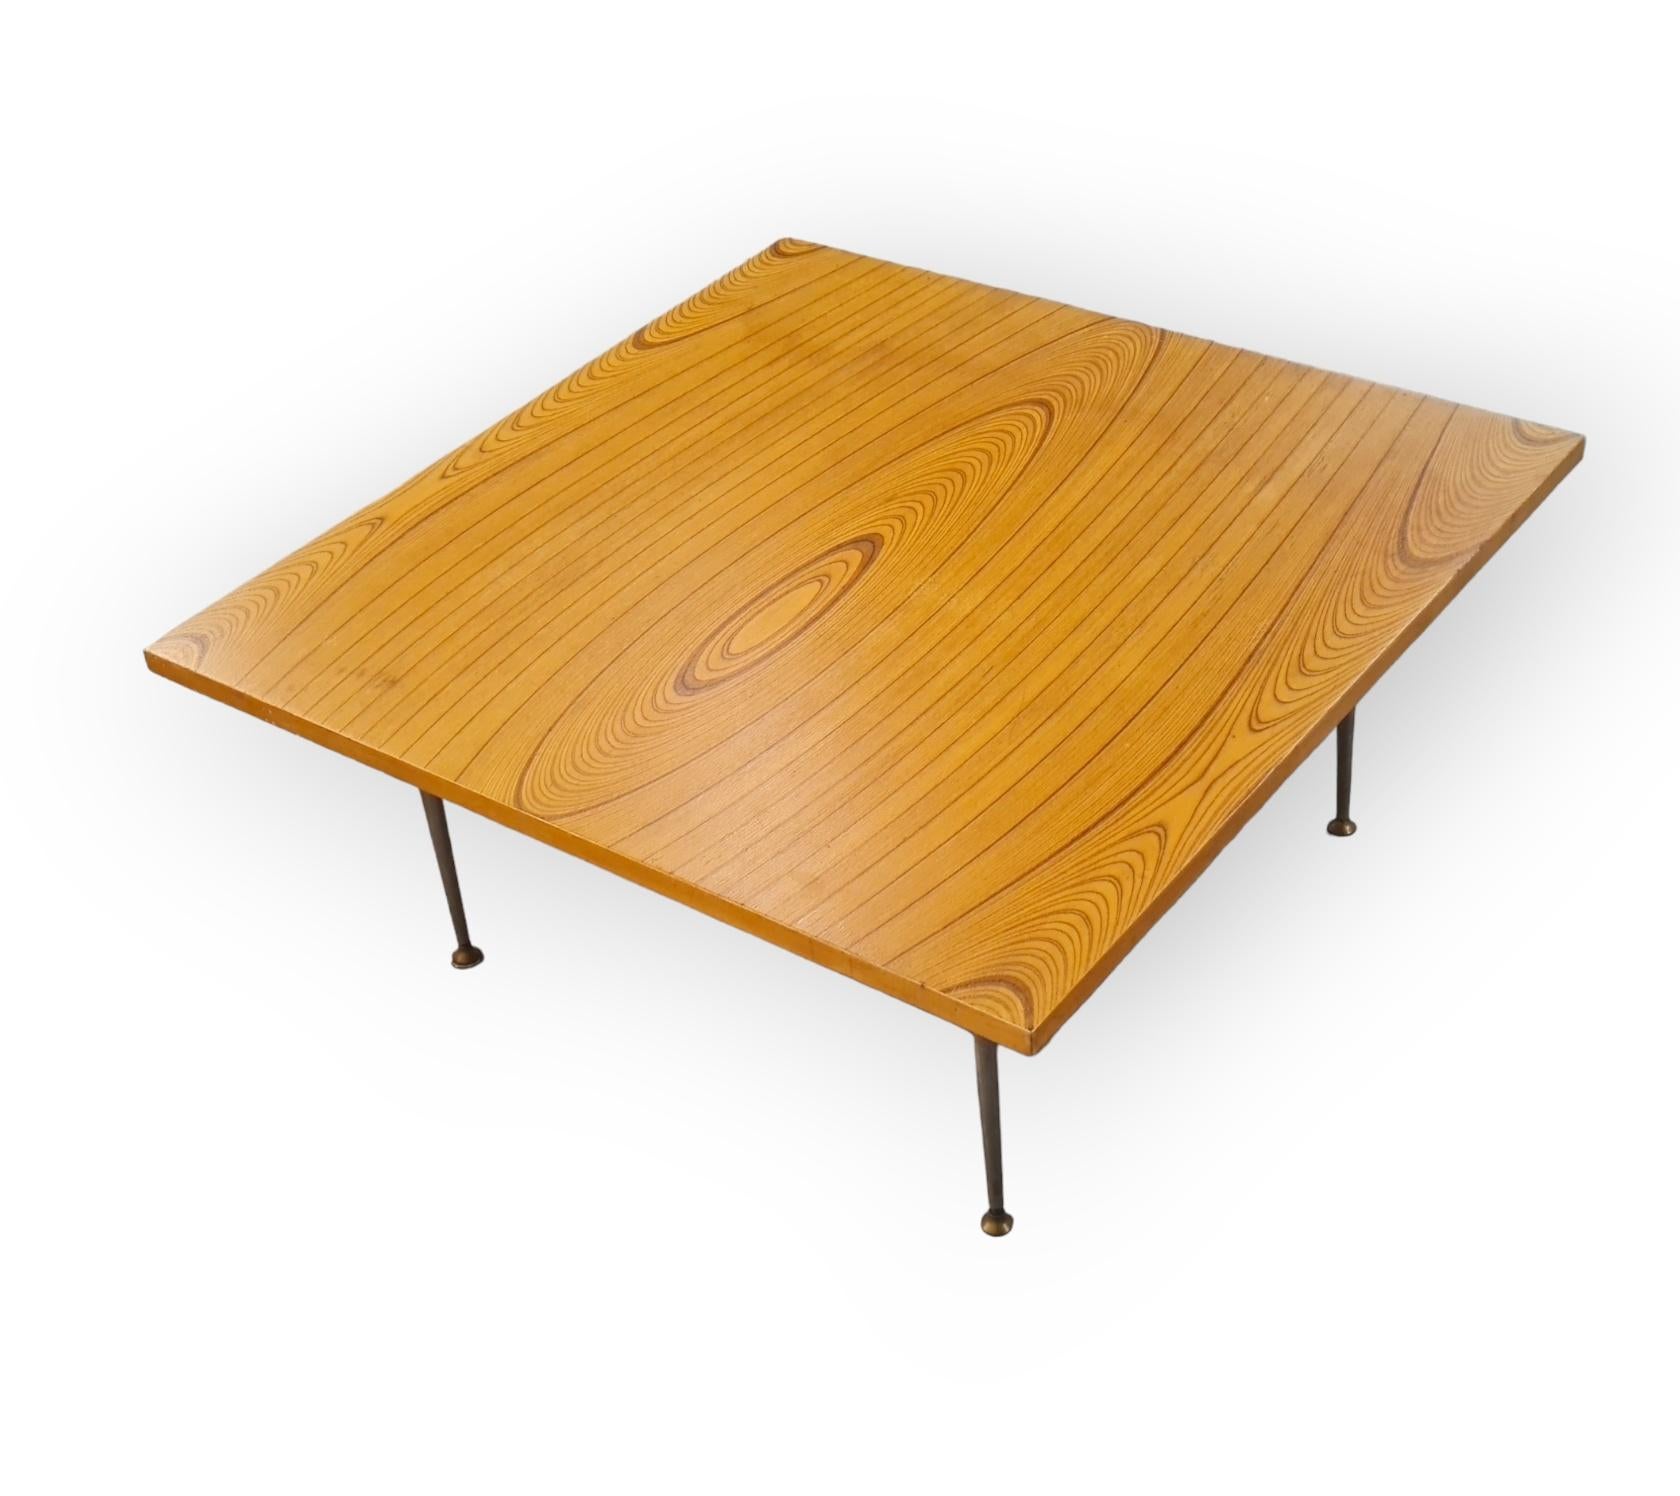 A rare version of the Tapio Wirkkala rhythmic veneer coffee table model 9018 with the original nickled brass legs.
Tapio Wirkkala started generating and enhancing this rhytmic veneer technique in the 1940s with the Soinne Oy veneer factory. The thin